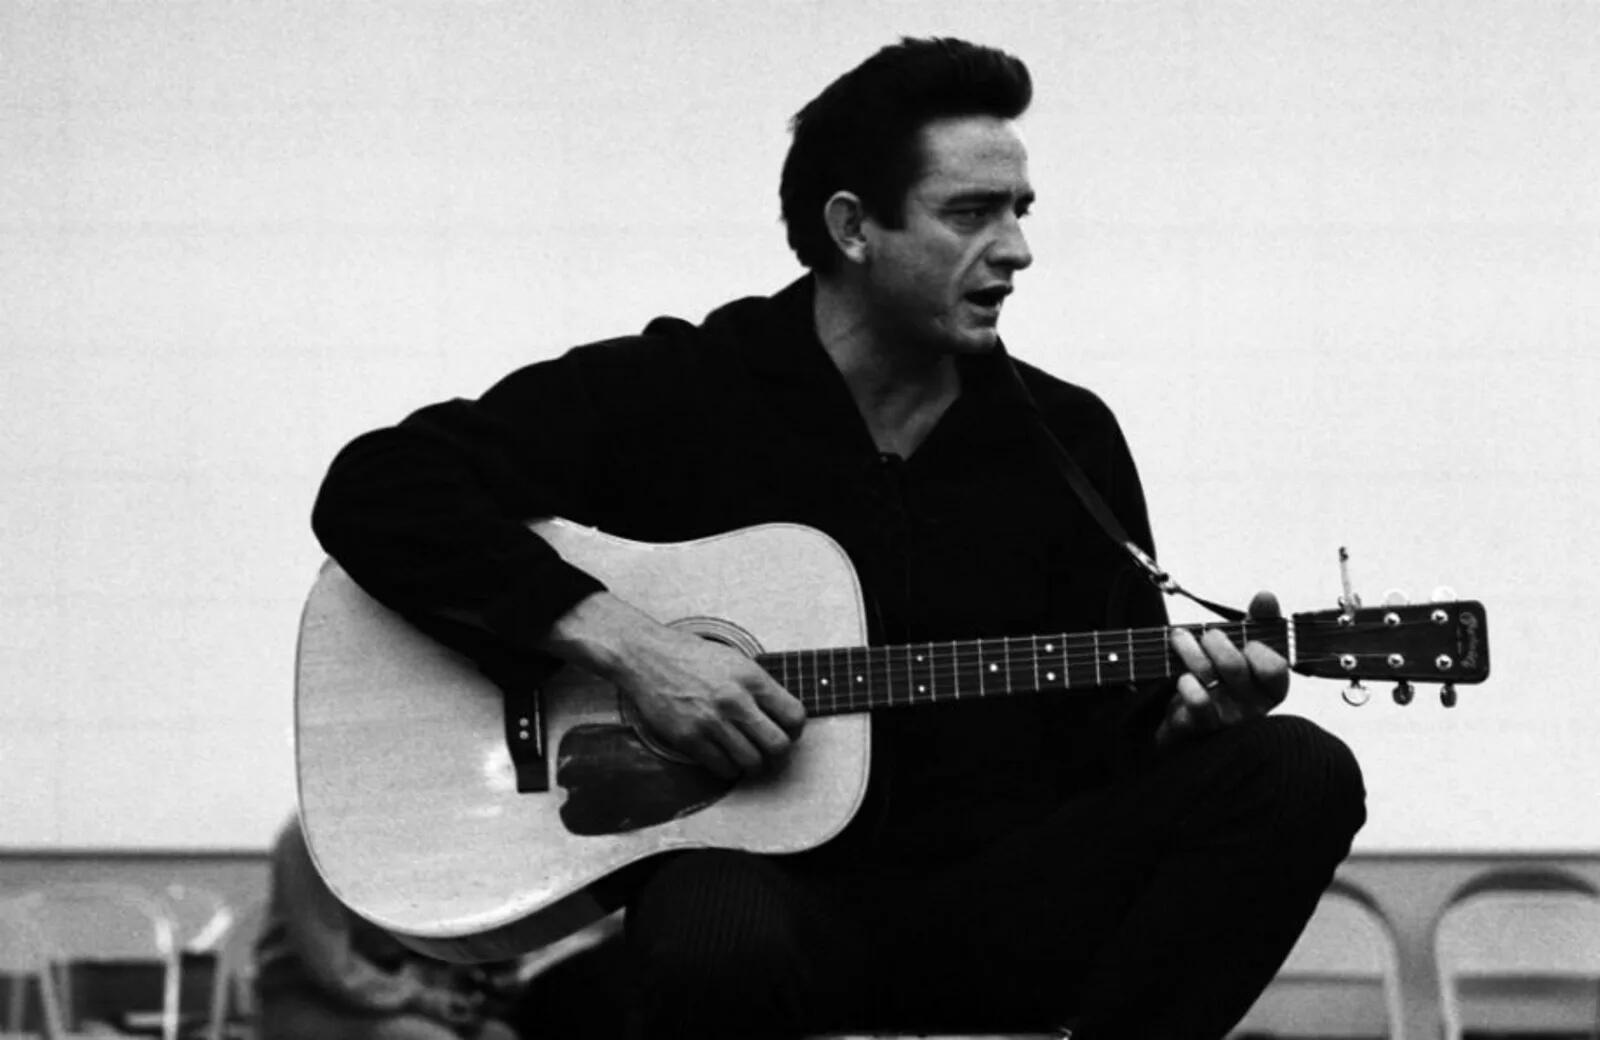 113. Johnny Cash. Its all over